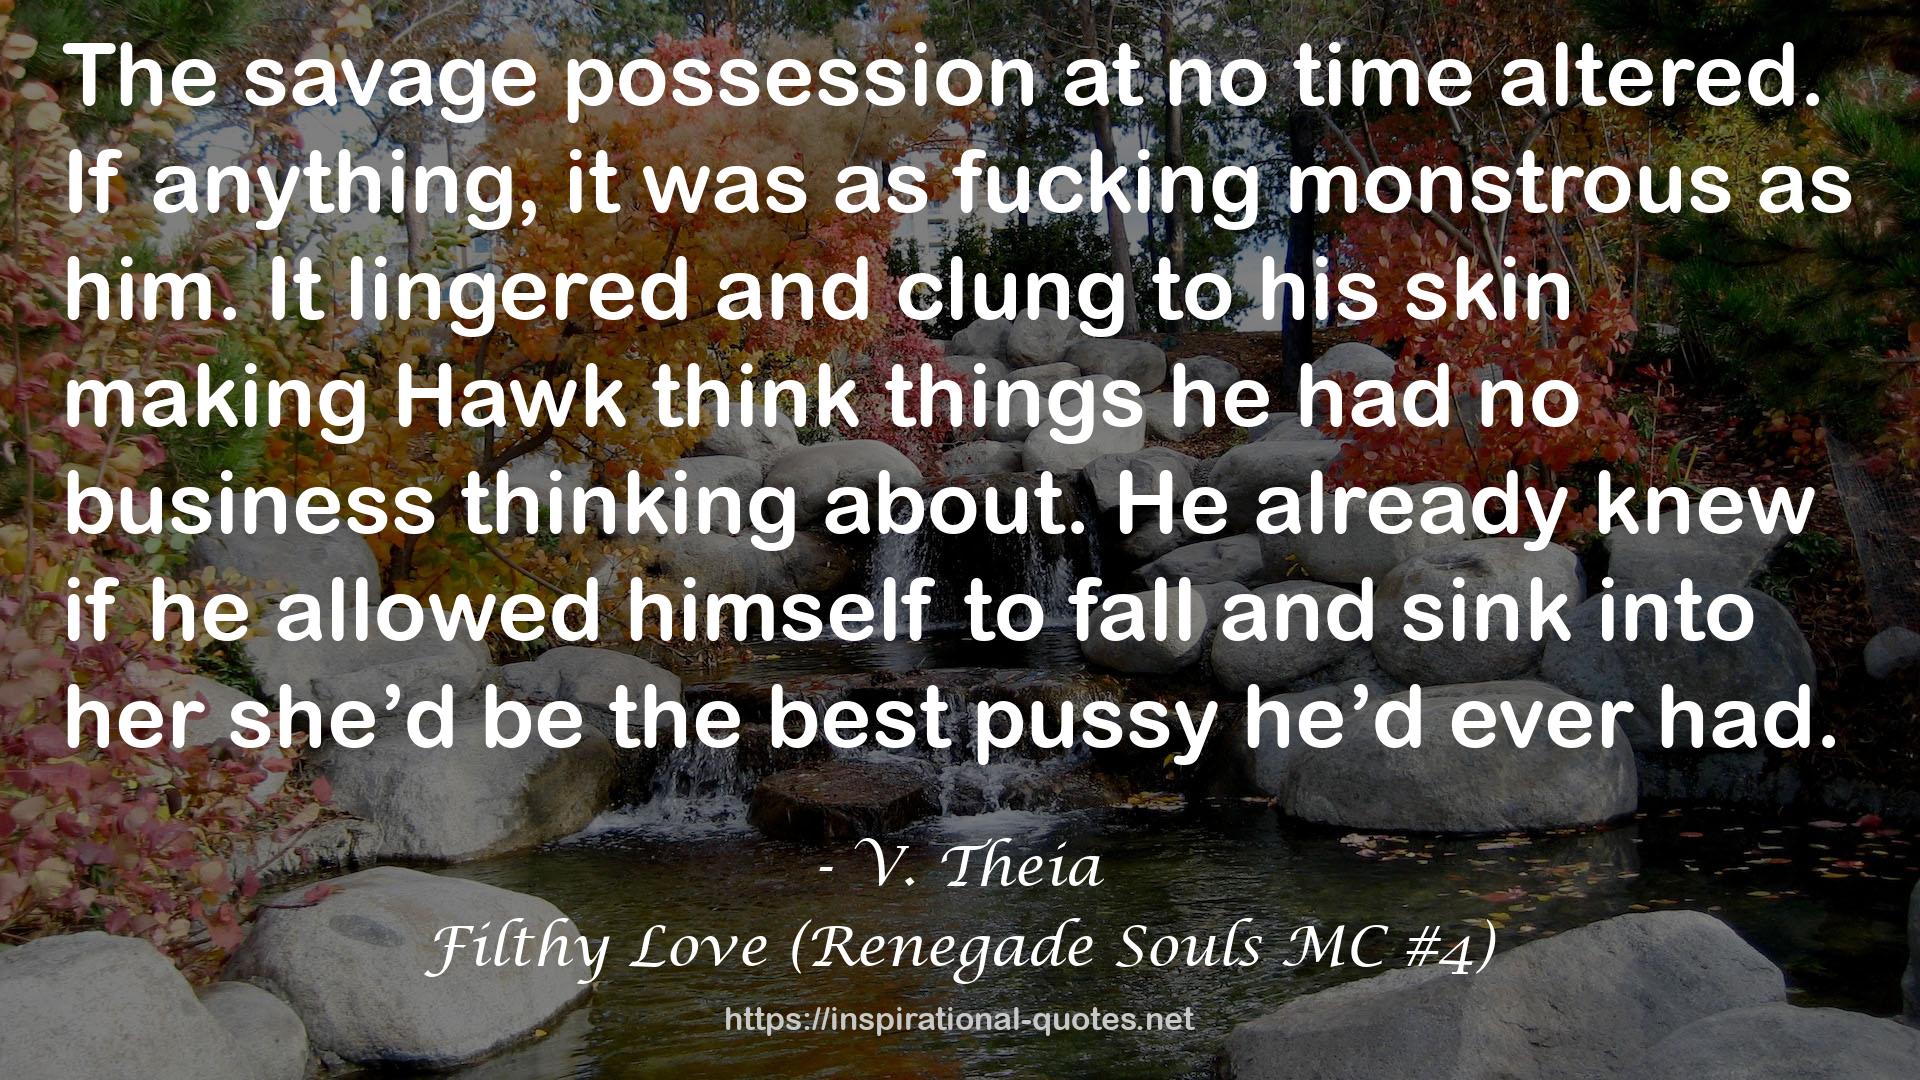 Filthy Love (Renegade Souls MC #4) QUOTES